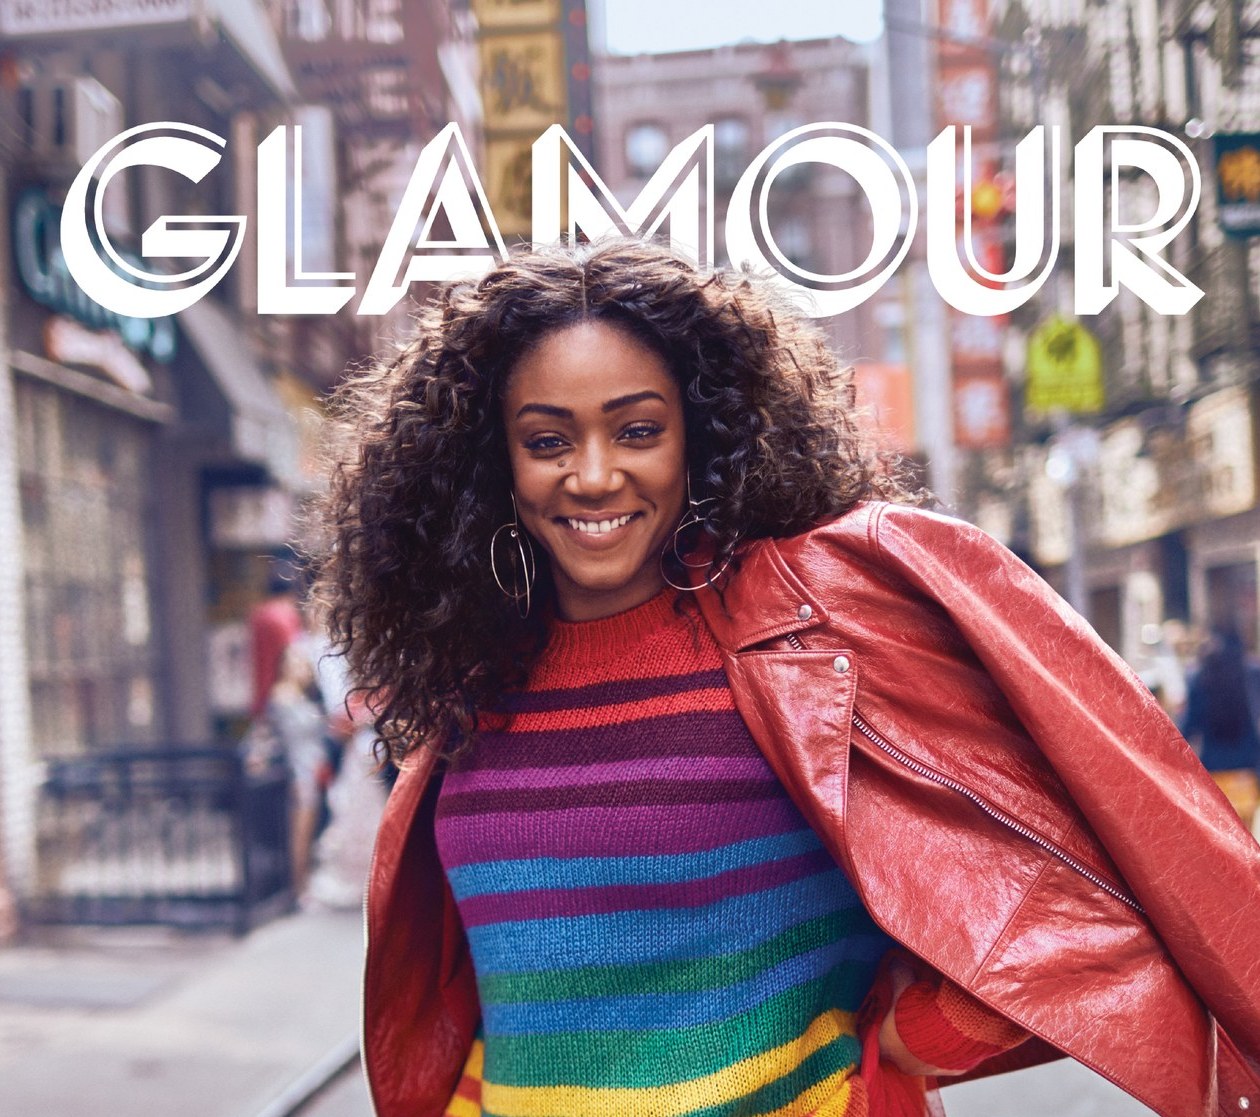 Tiffany Haddish opens up to Glamour about being raped at 17